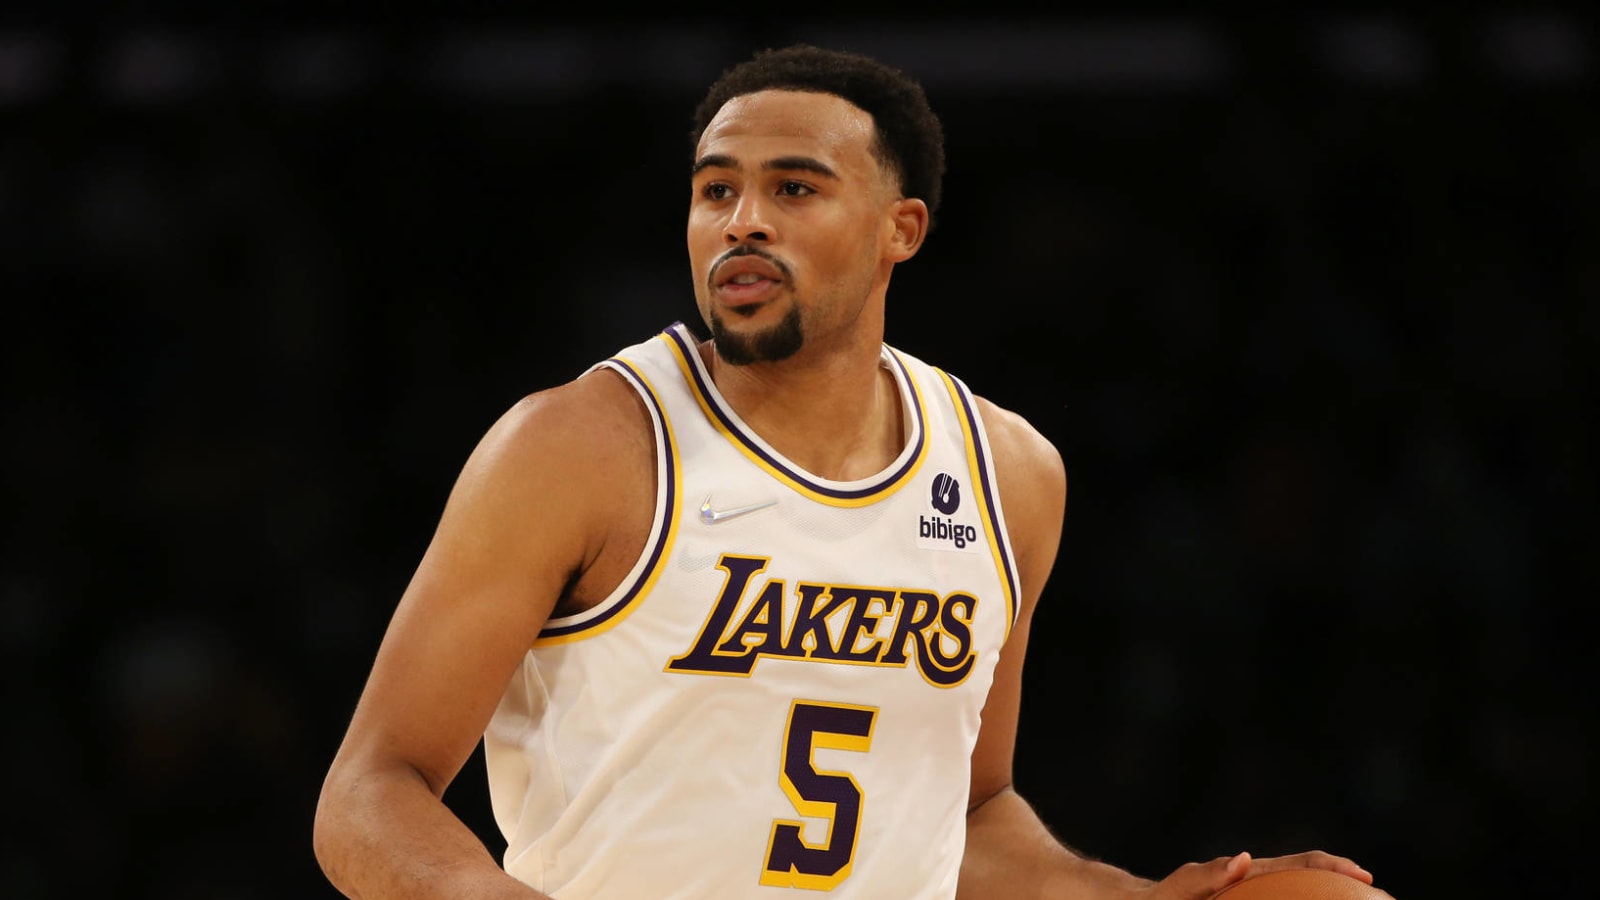 Lakers' Horton-Tucker placed in health and safety protocols